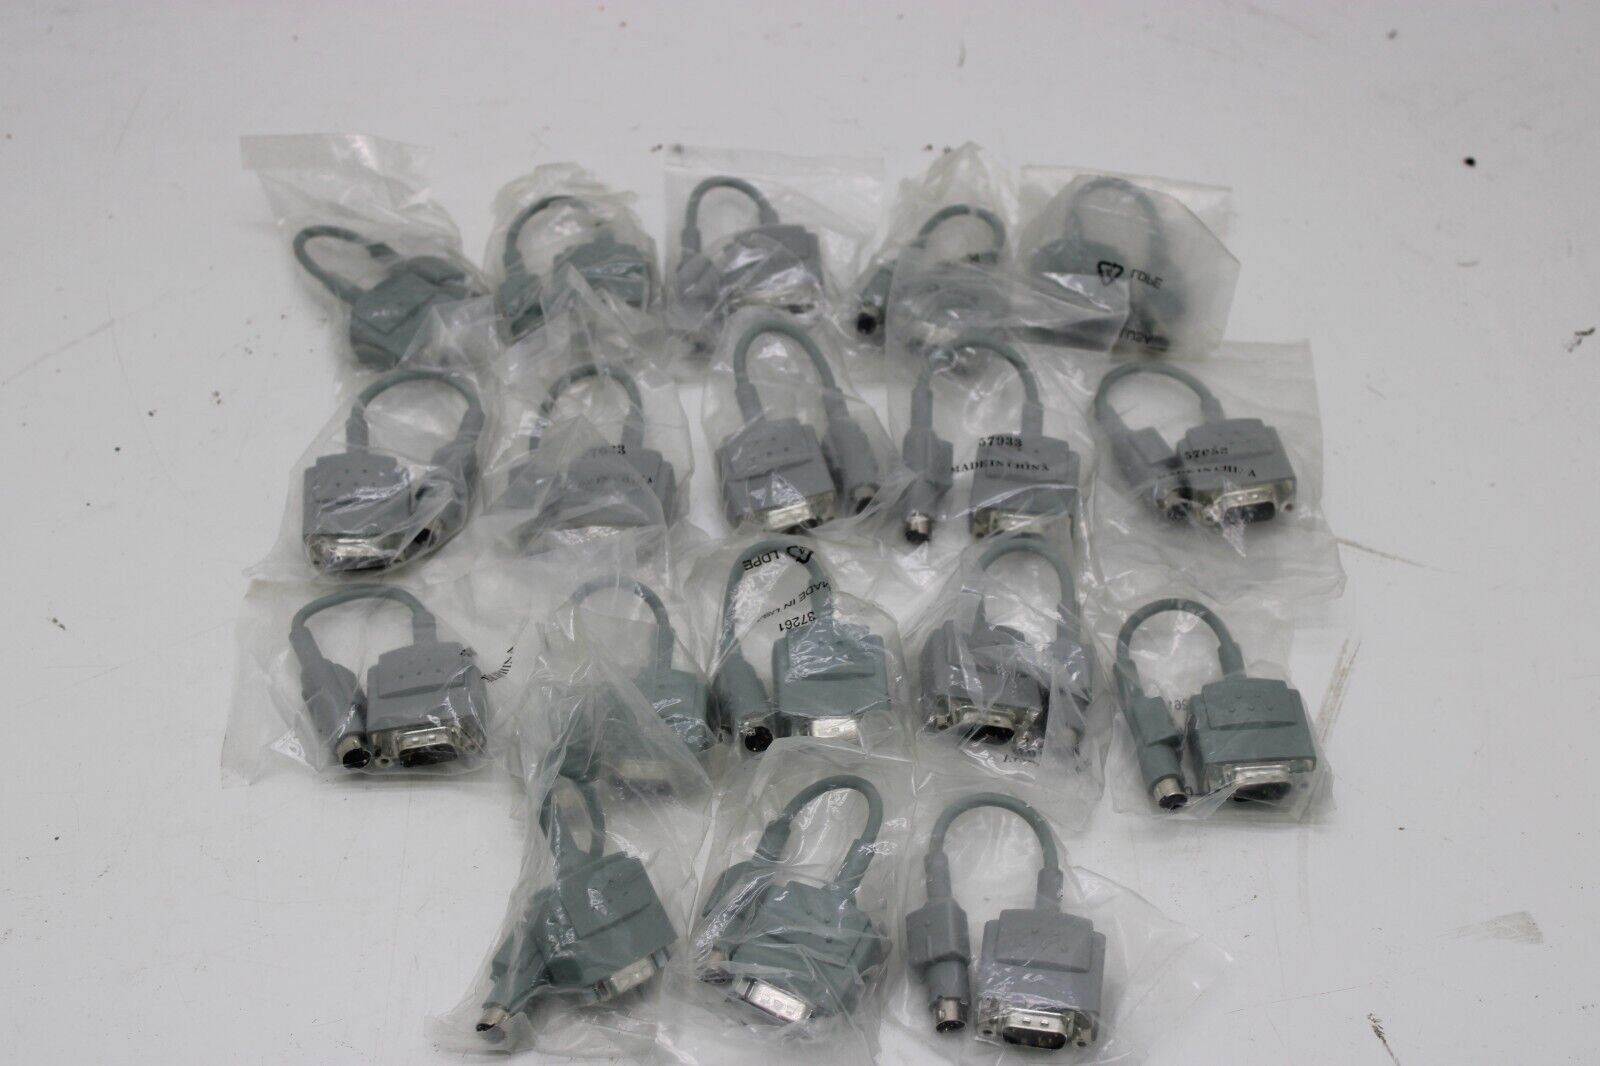 Lot of 18 - NEW - M Serial Cable to M PS/2 Adapters